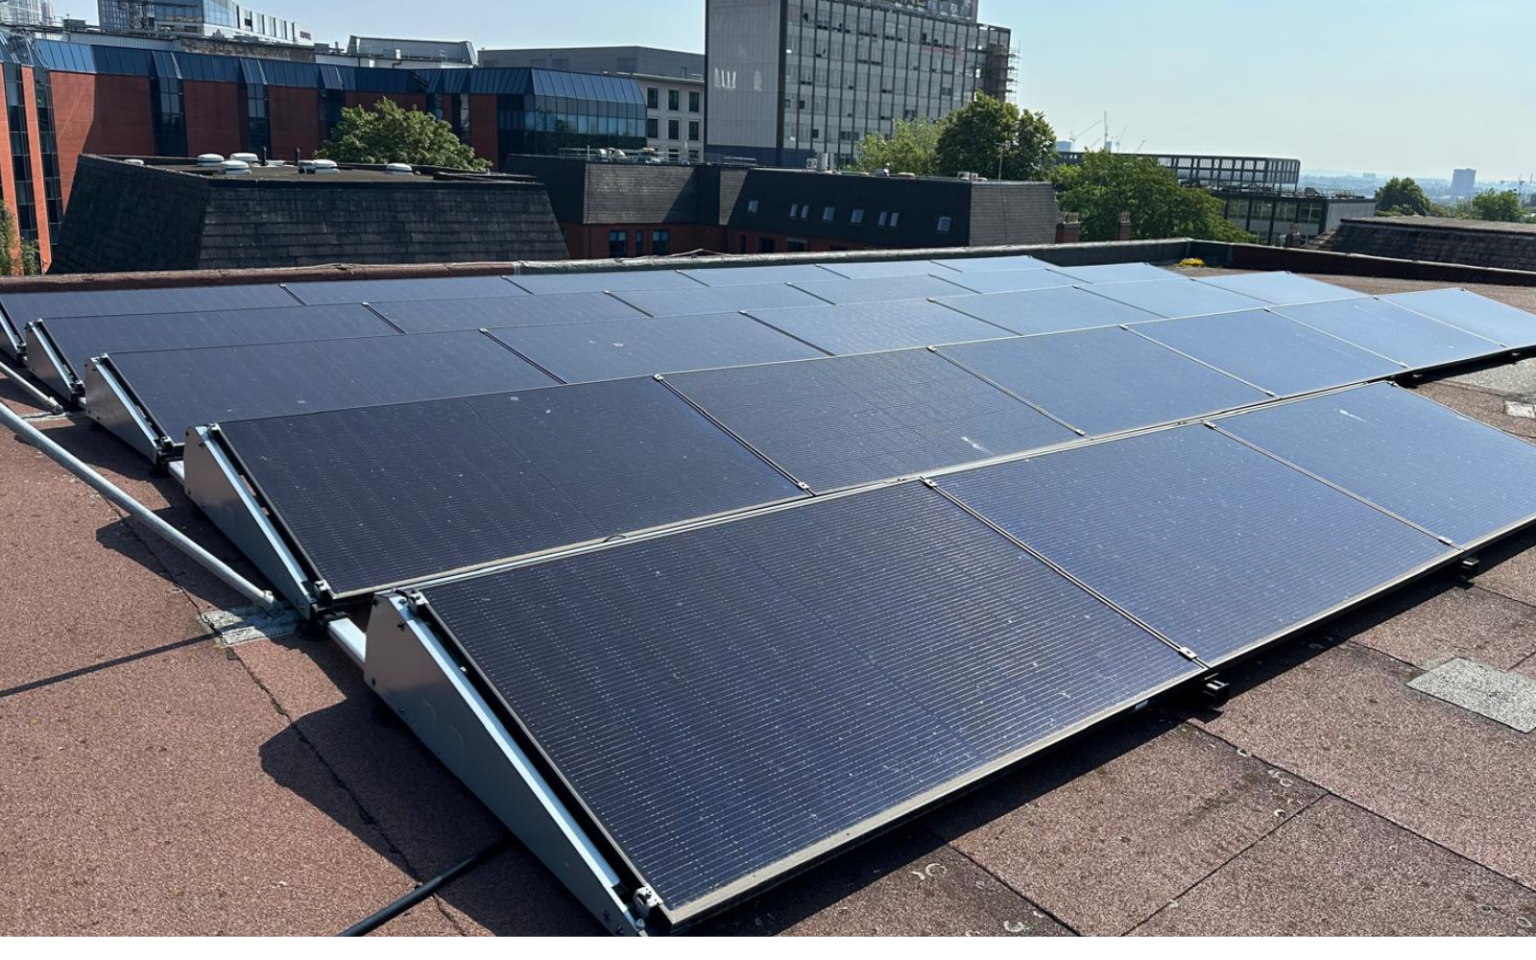 Solar panels in the middle of VIQU's roof highlighting exciting strides forward in VIQU's green journey.